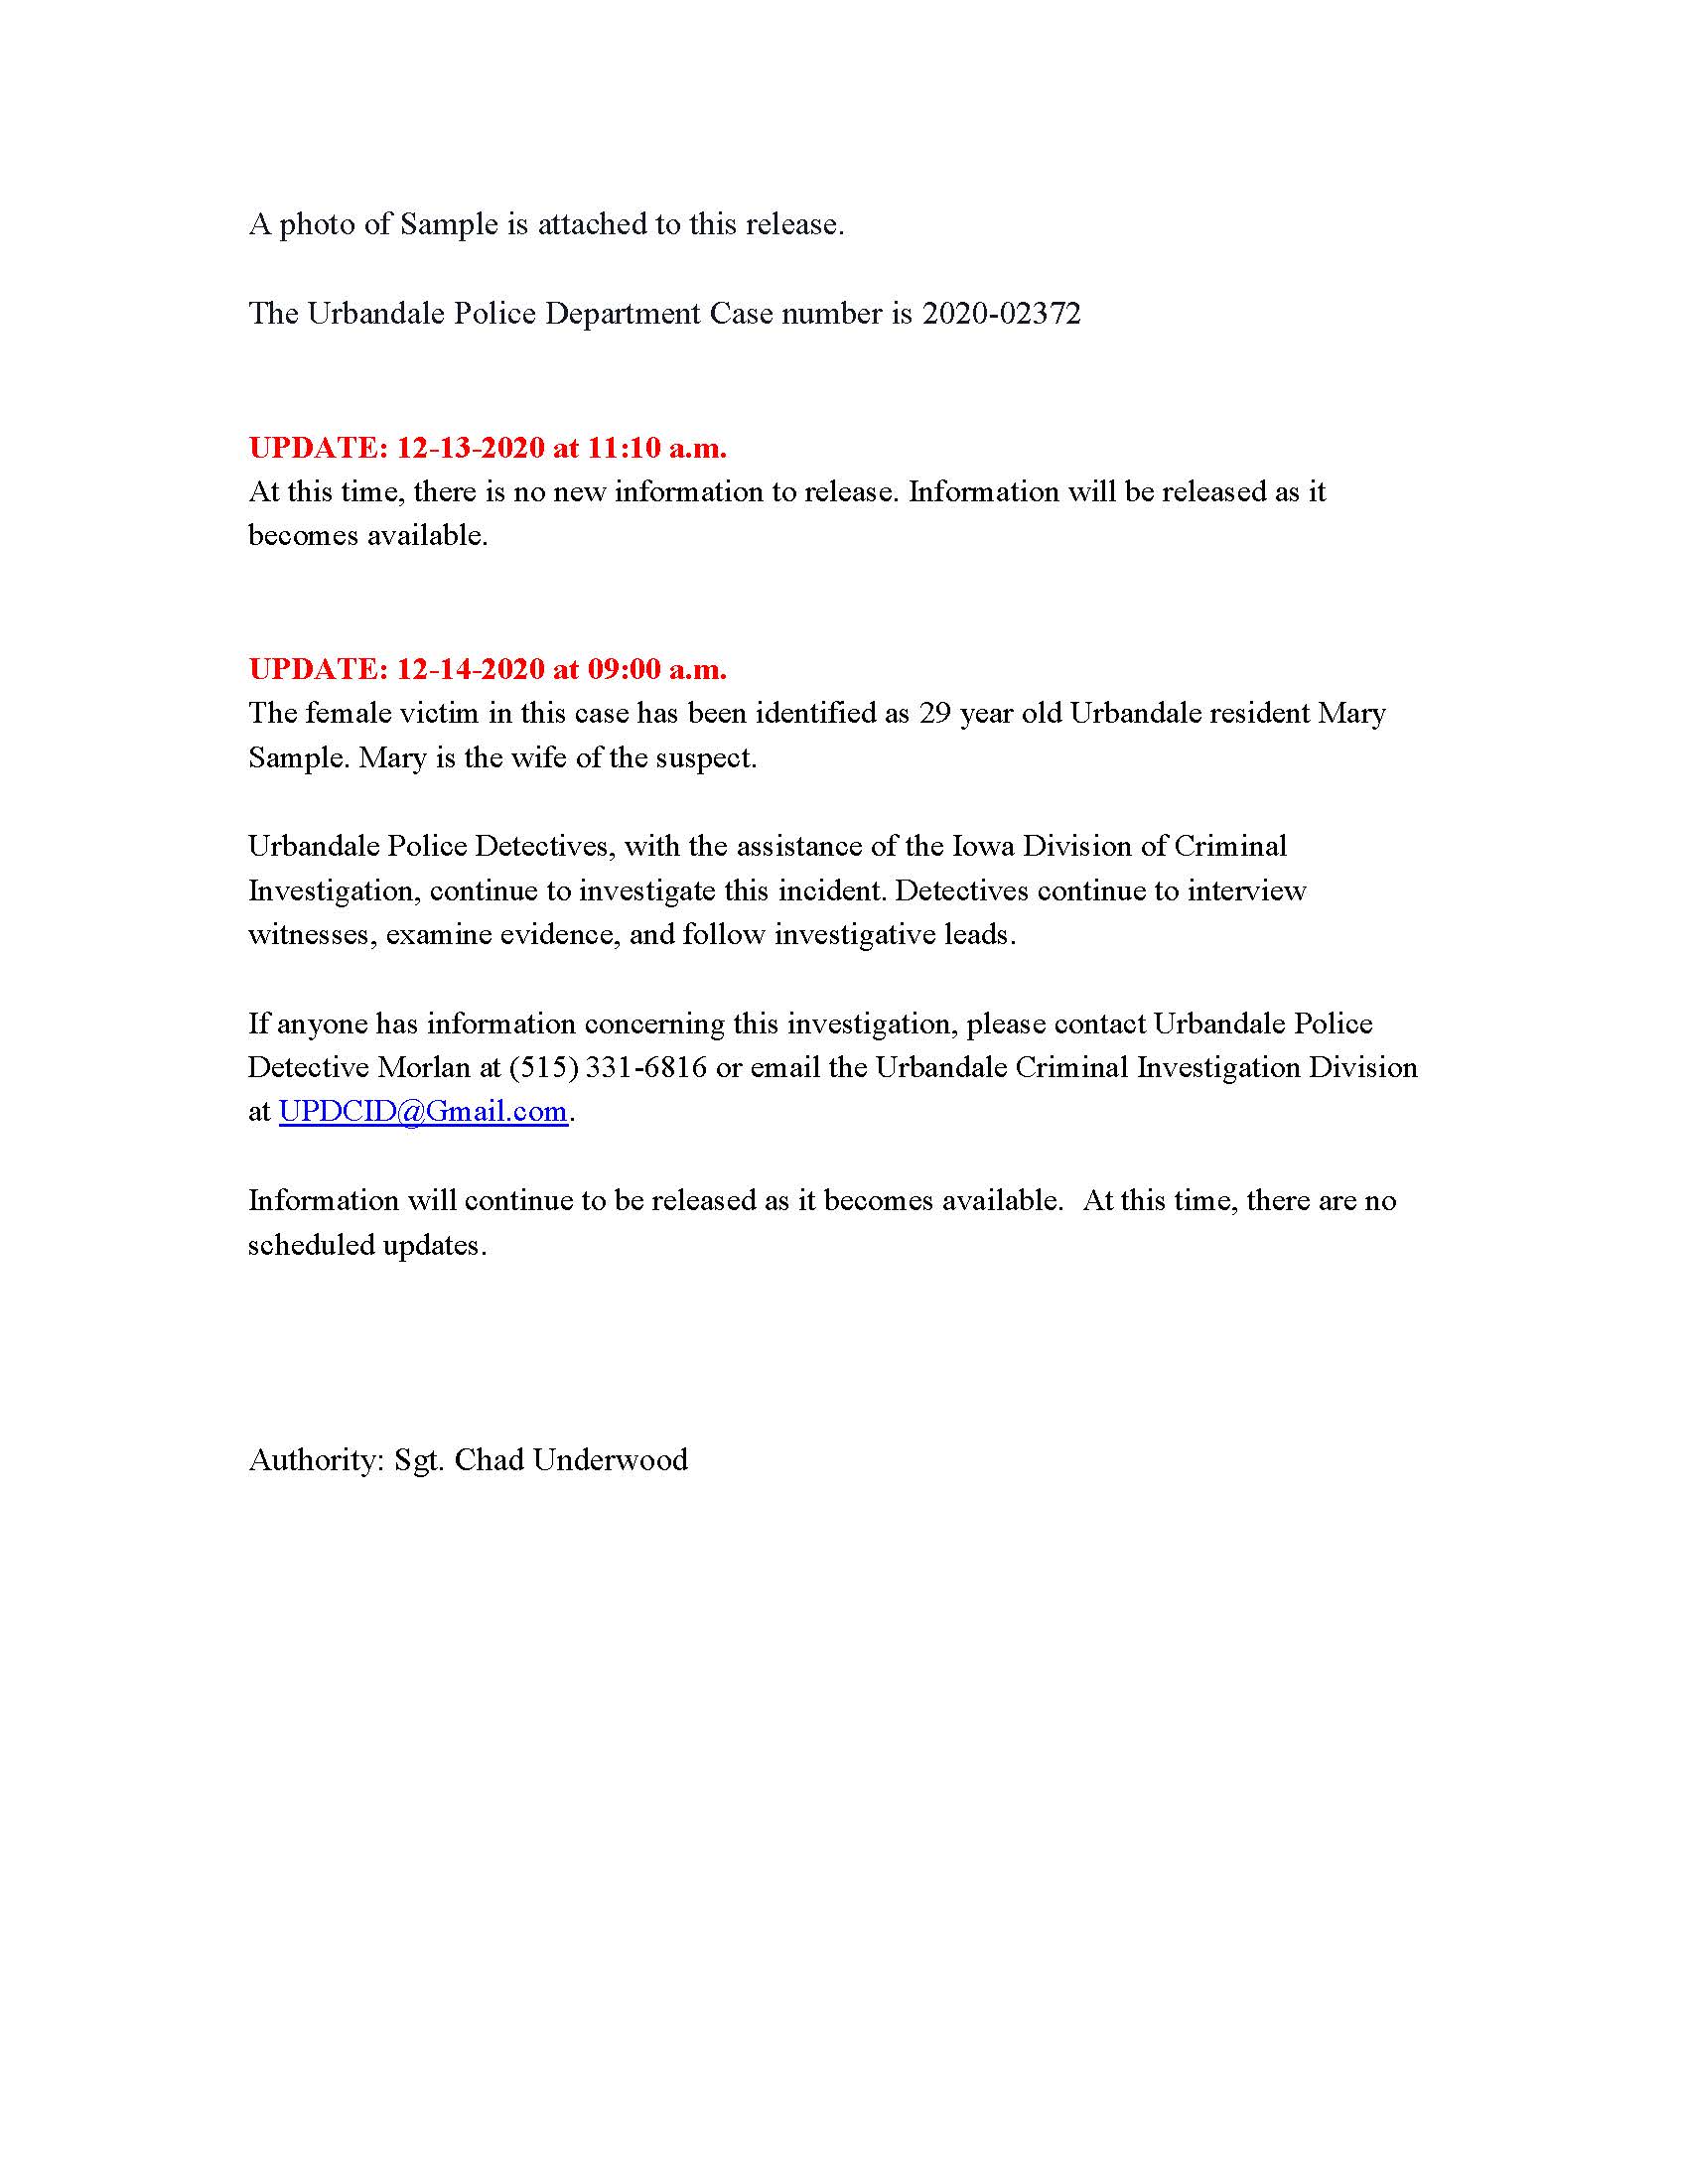 Link to UPD press release page 2